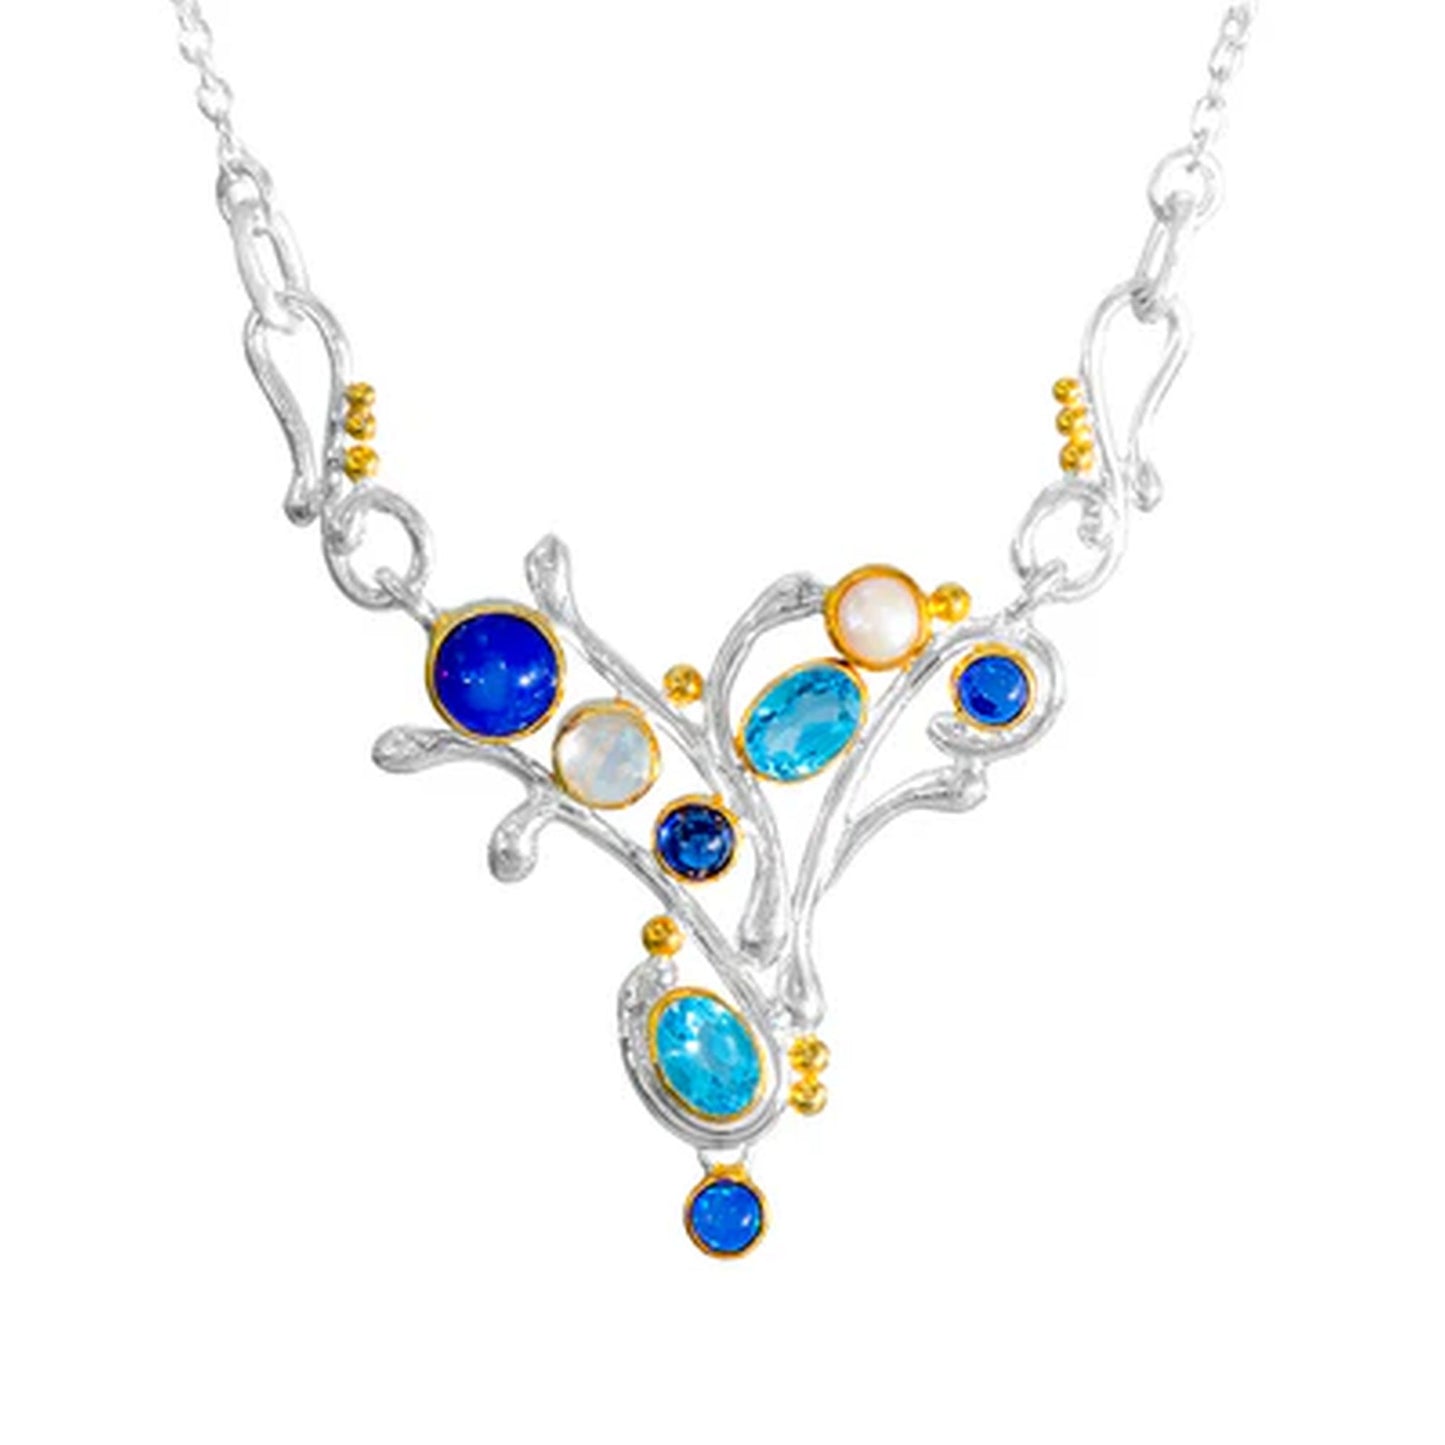 Sterling Silver Necklace with Topaz and Opal